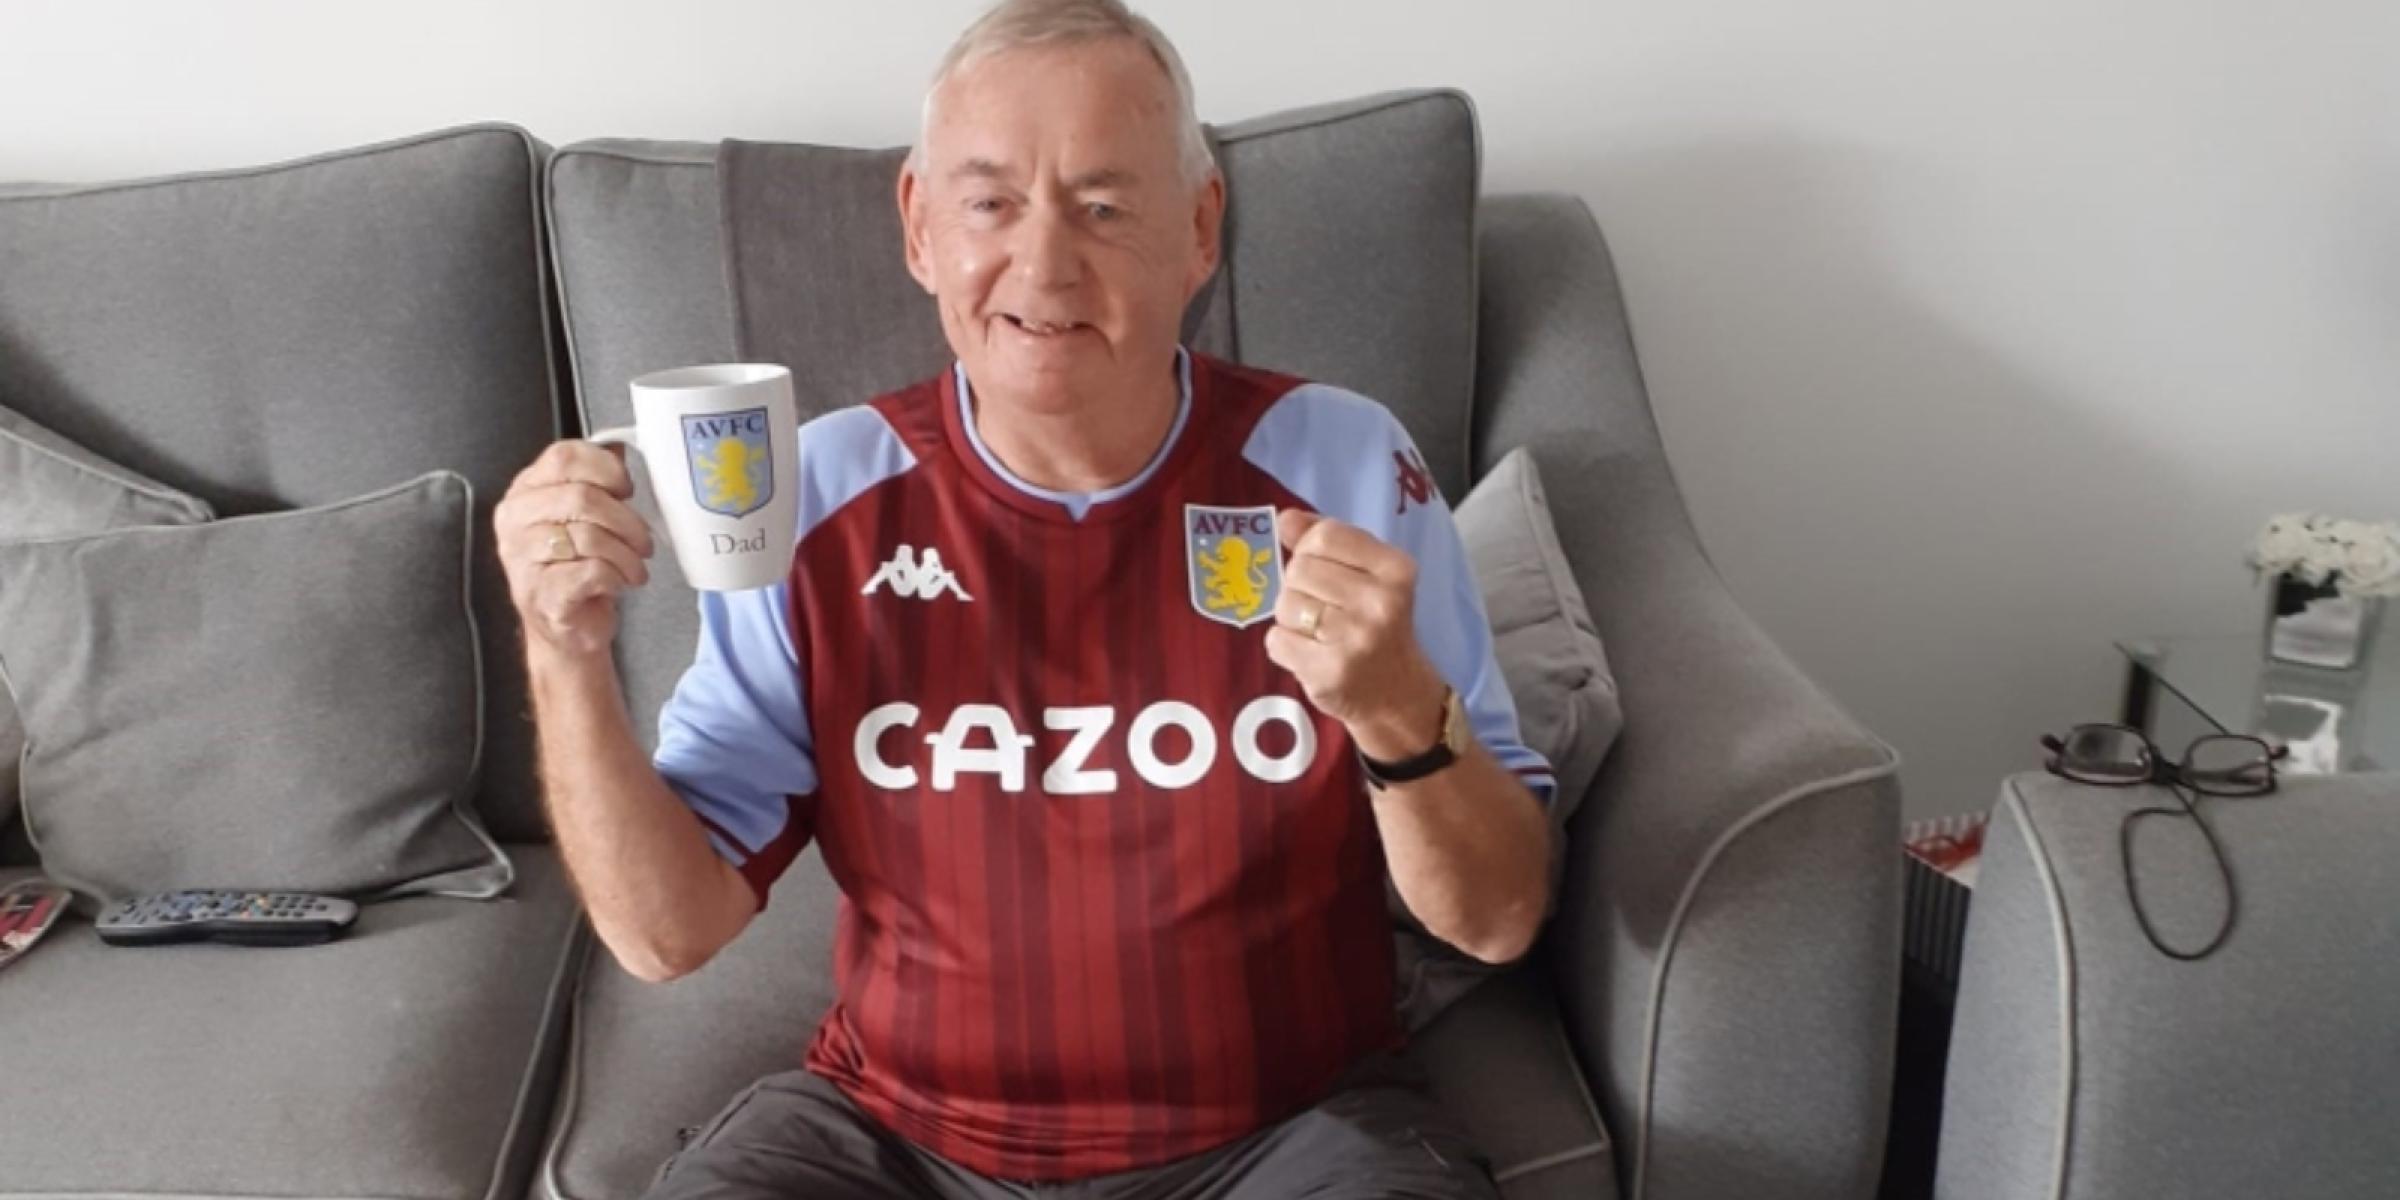 Peter wearing an Aston Villa shirt and holding a matching mug, smiling and with a clenched fist in excitement